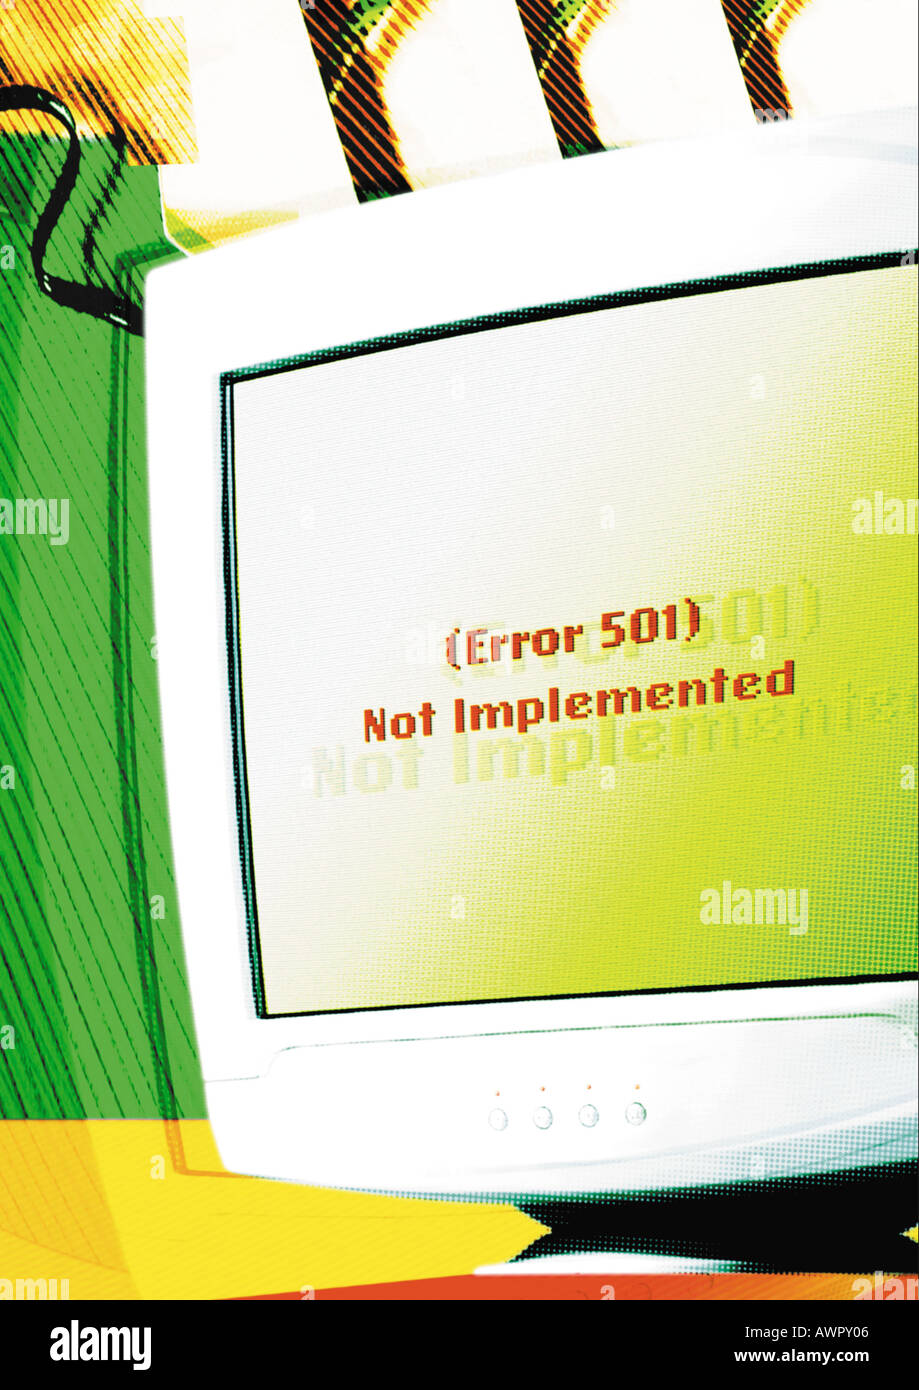 Computer, 'Not Implemented' message on screen, digital composite. Stock Photo